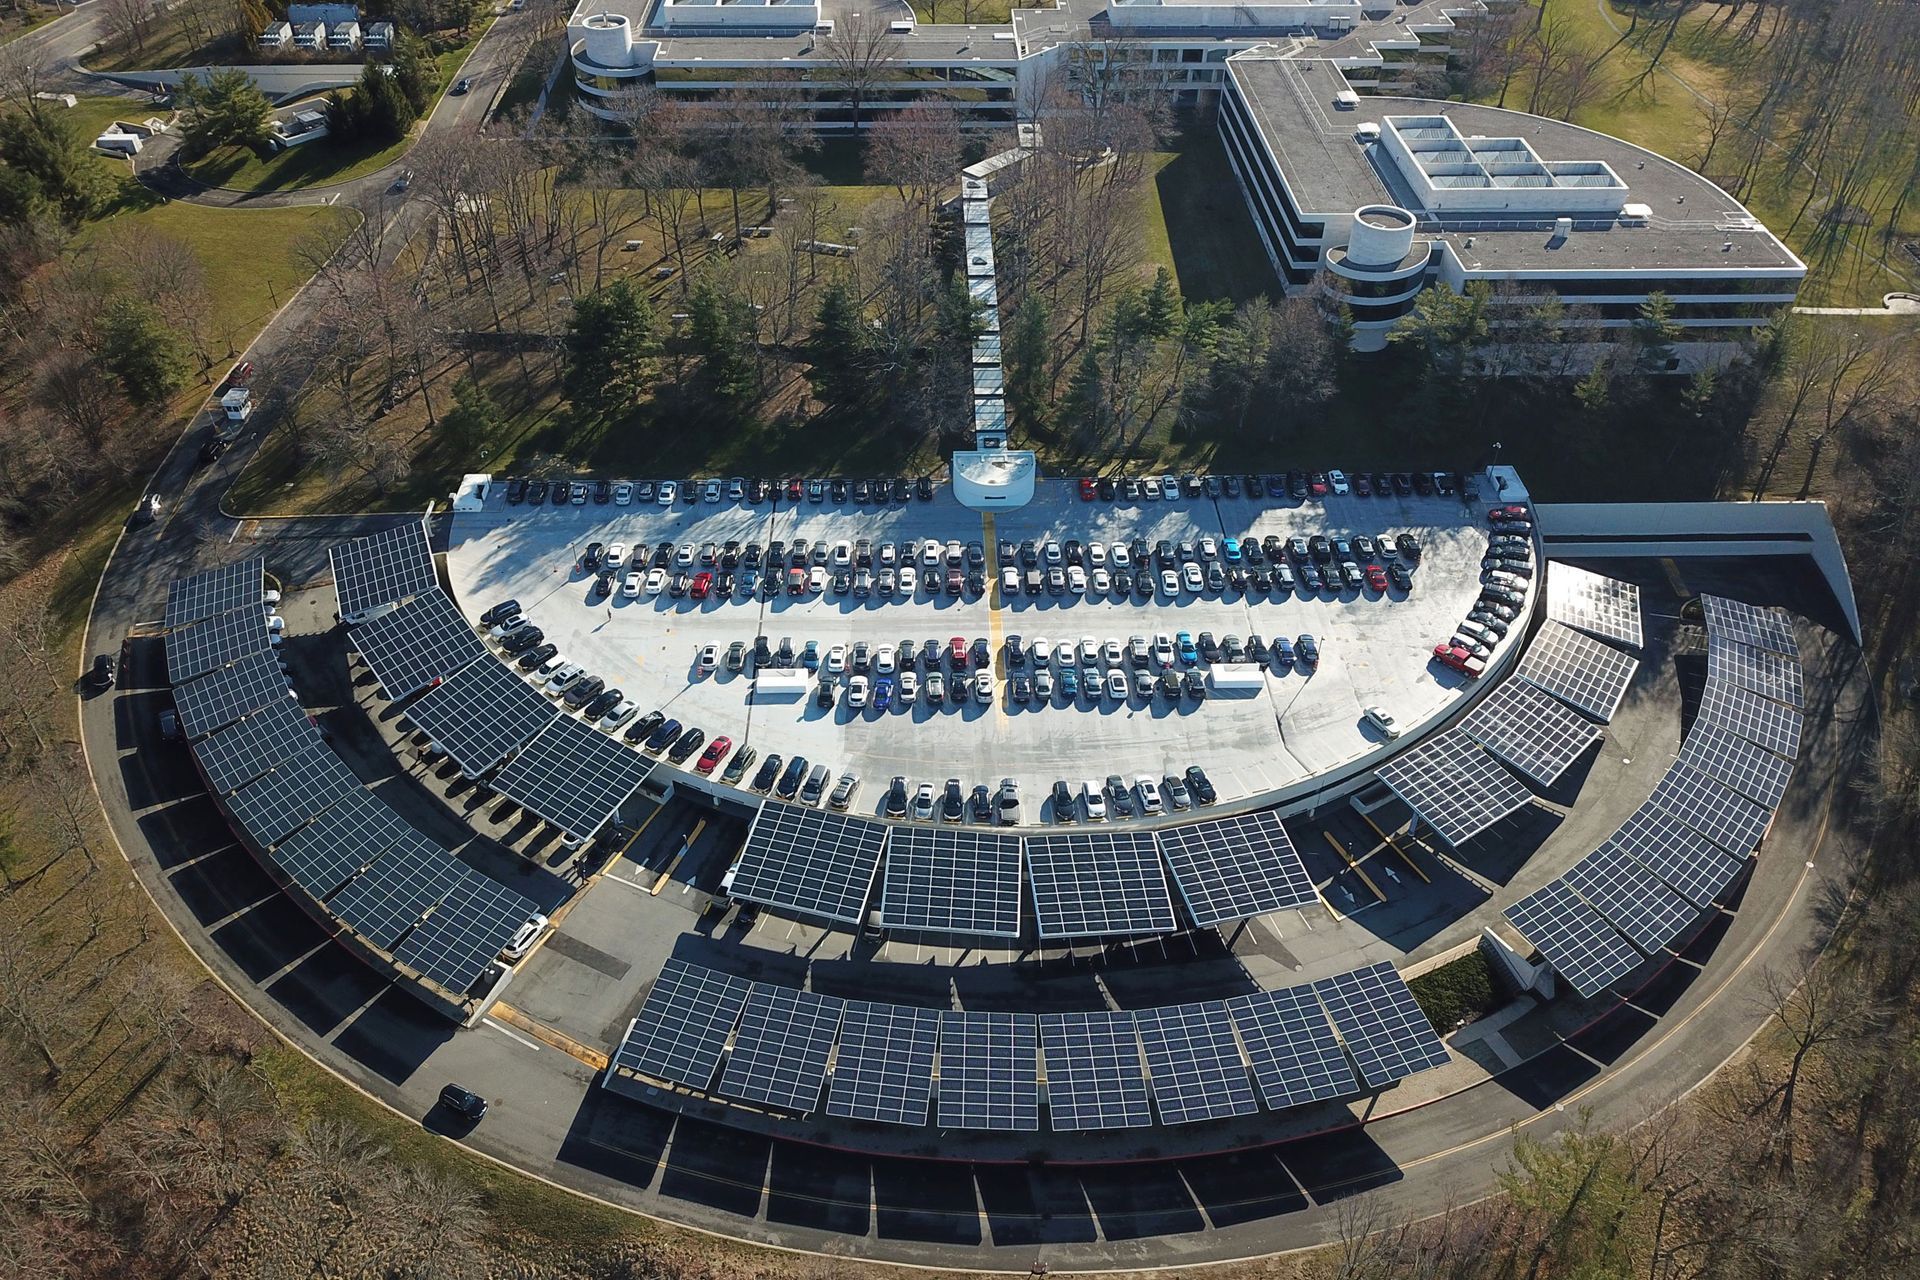 Large Canopy Solar Panel System surrounding a large semi-circle shaped parking lot